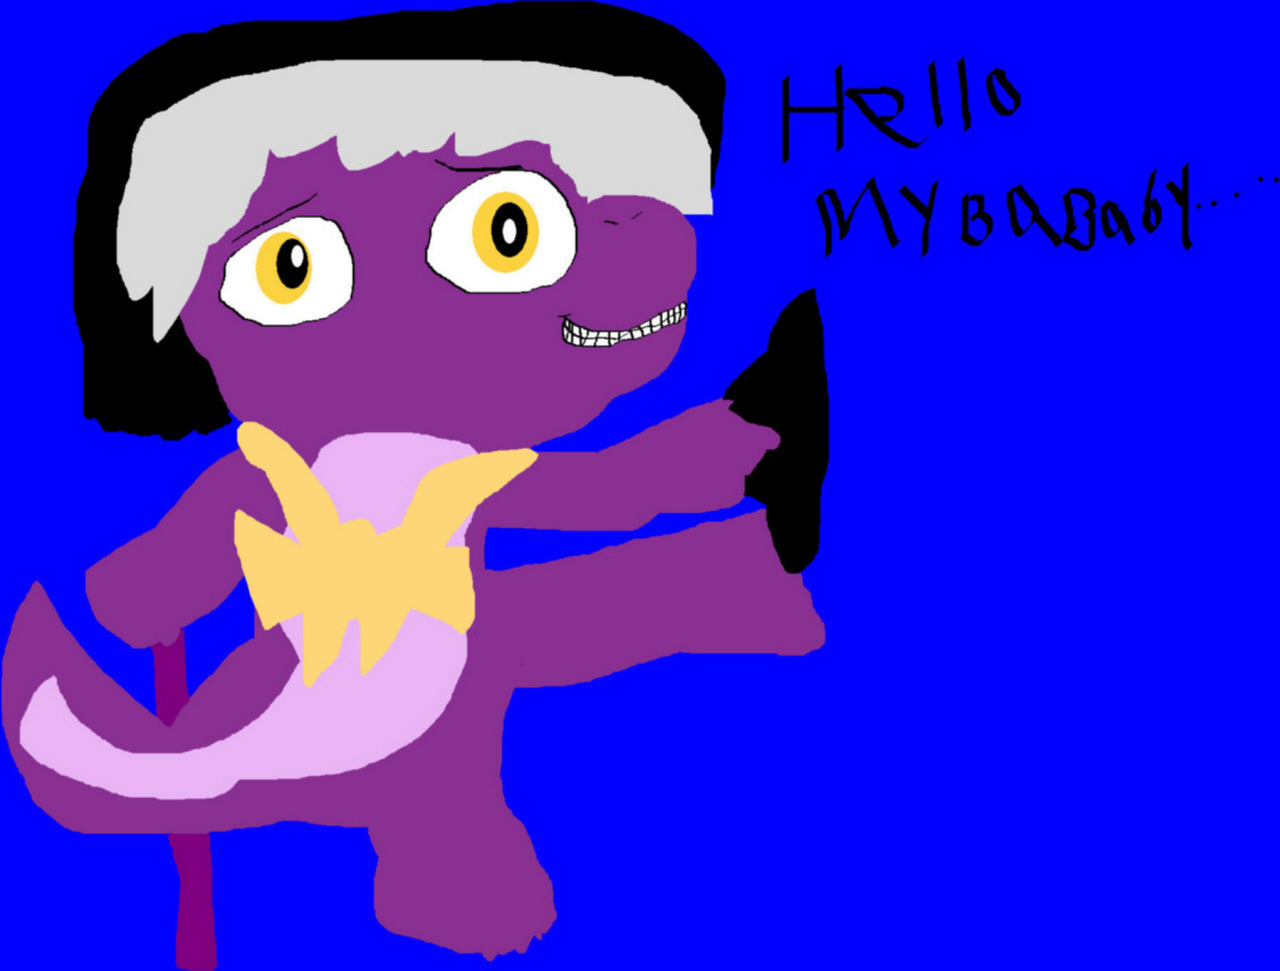 Hello My Bababy MS Paint by Falconlobo